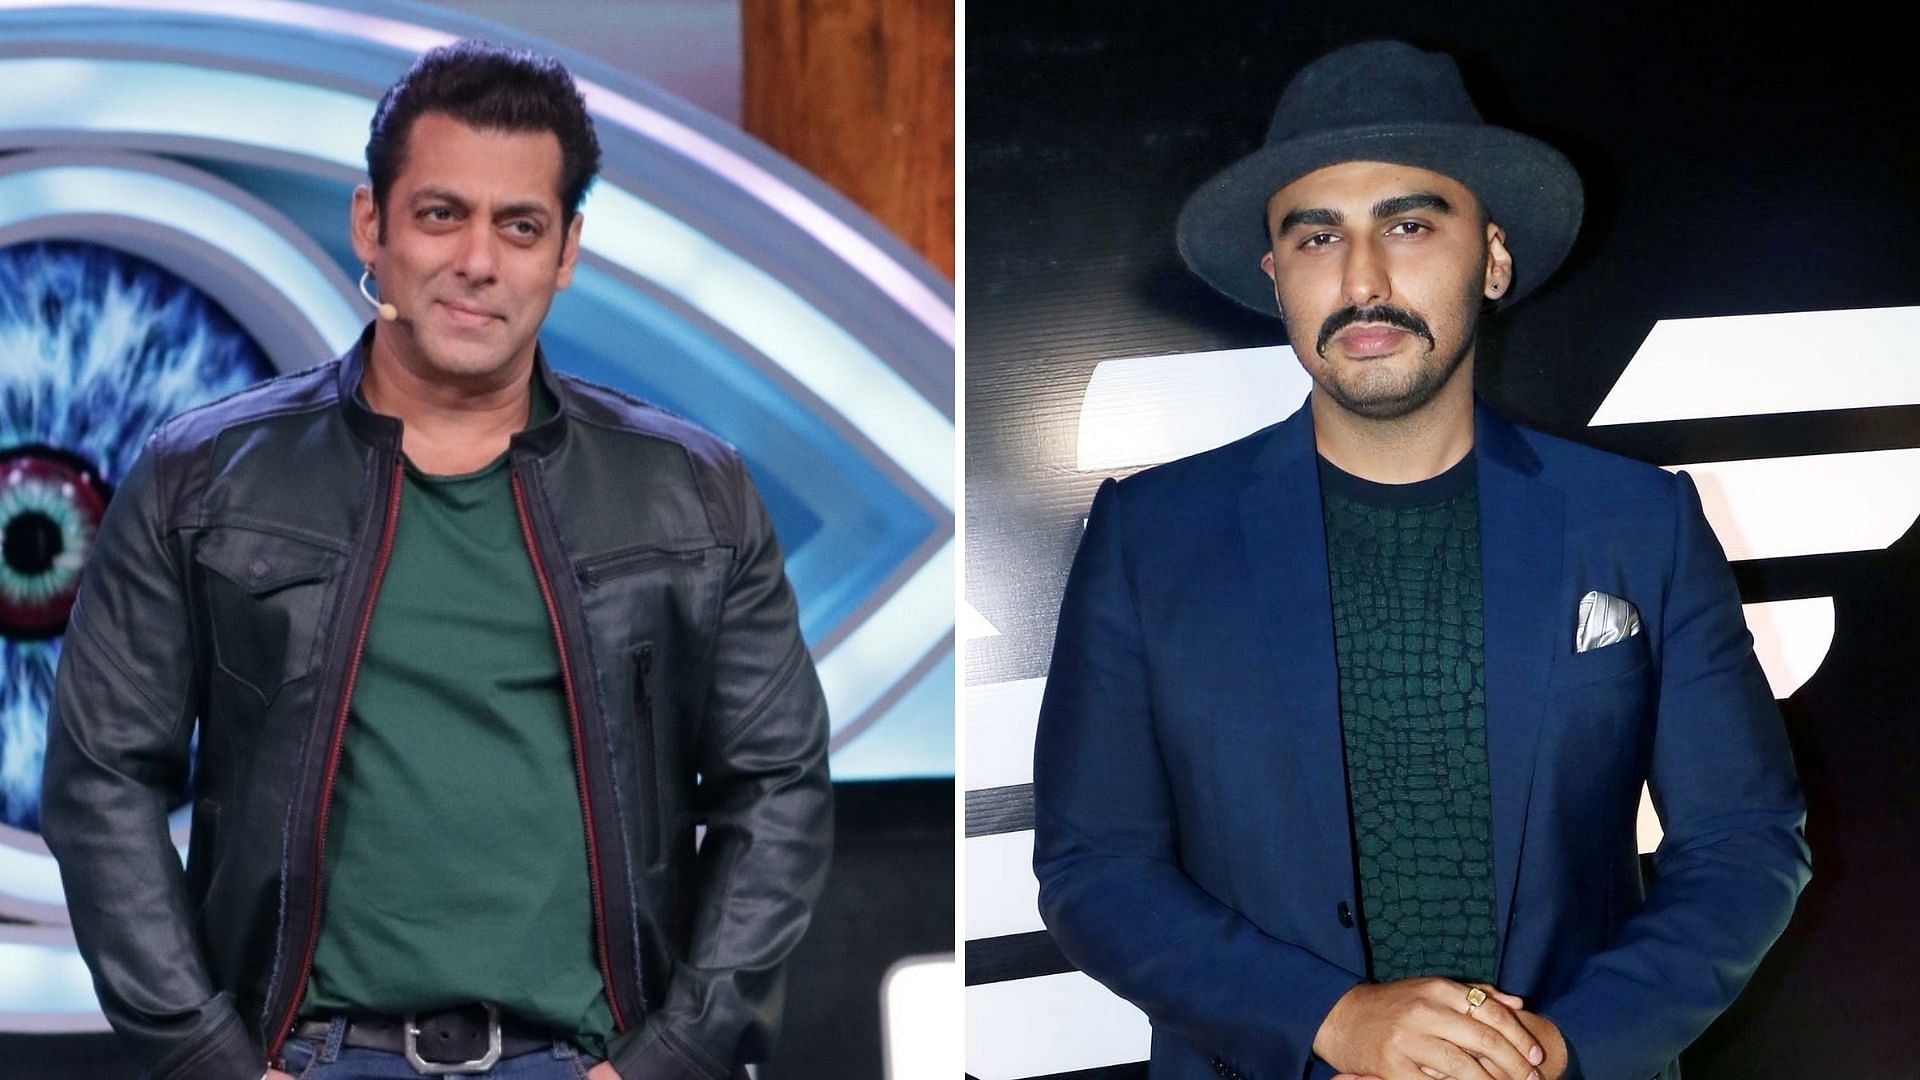 Salman Khan is reportedly the reason why Arjun Kapoor has been snubbed by <i>The Kapil Sharma Show</i>.